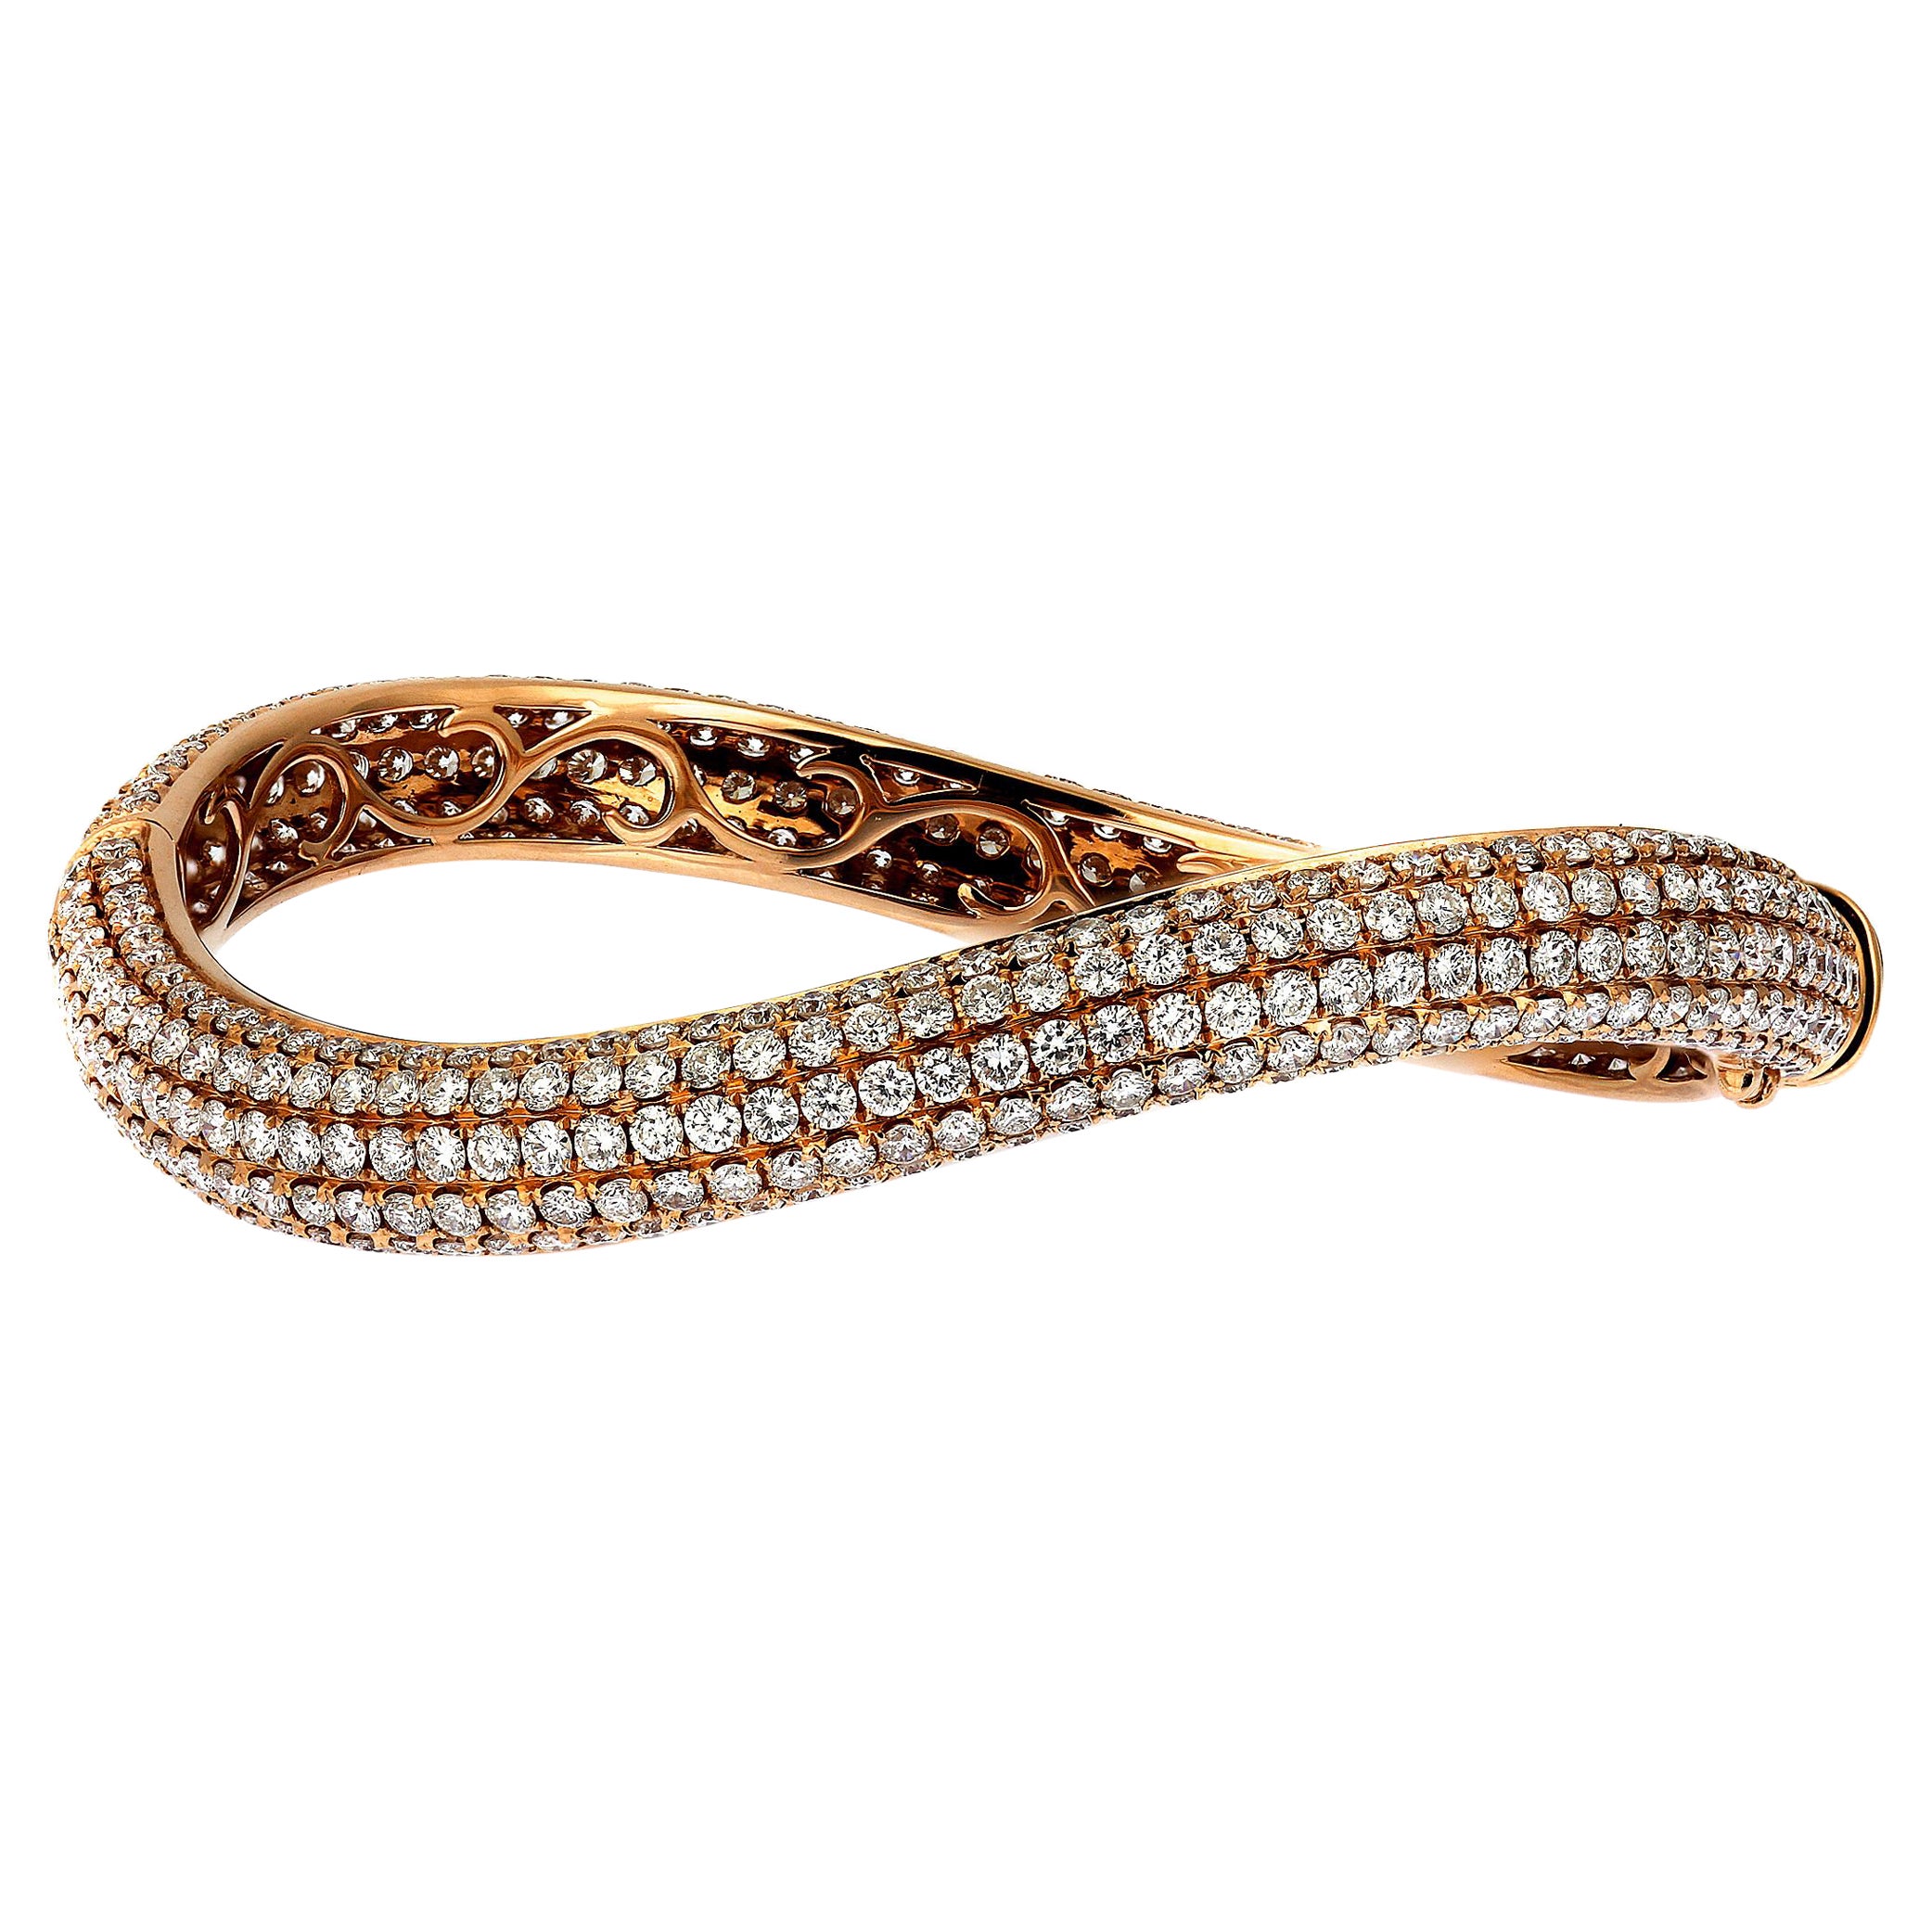 5 Row Pave Diamond Bangle of 9.7cts set in 18ct Rose Gold For Sale